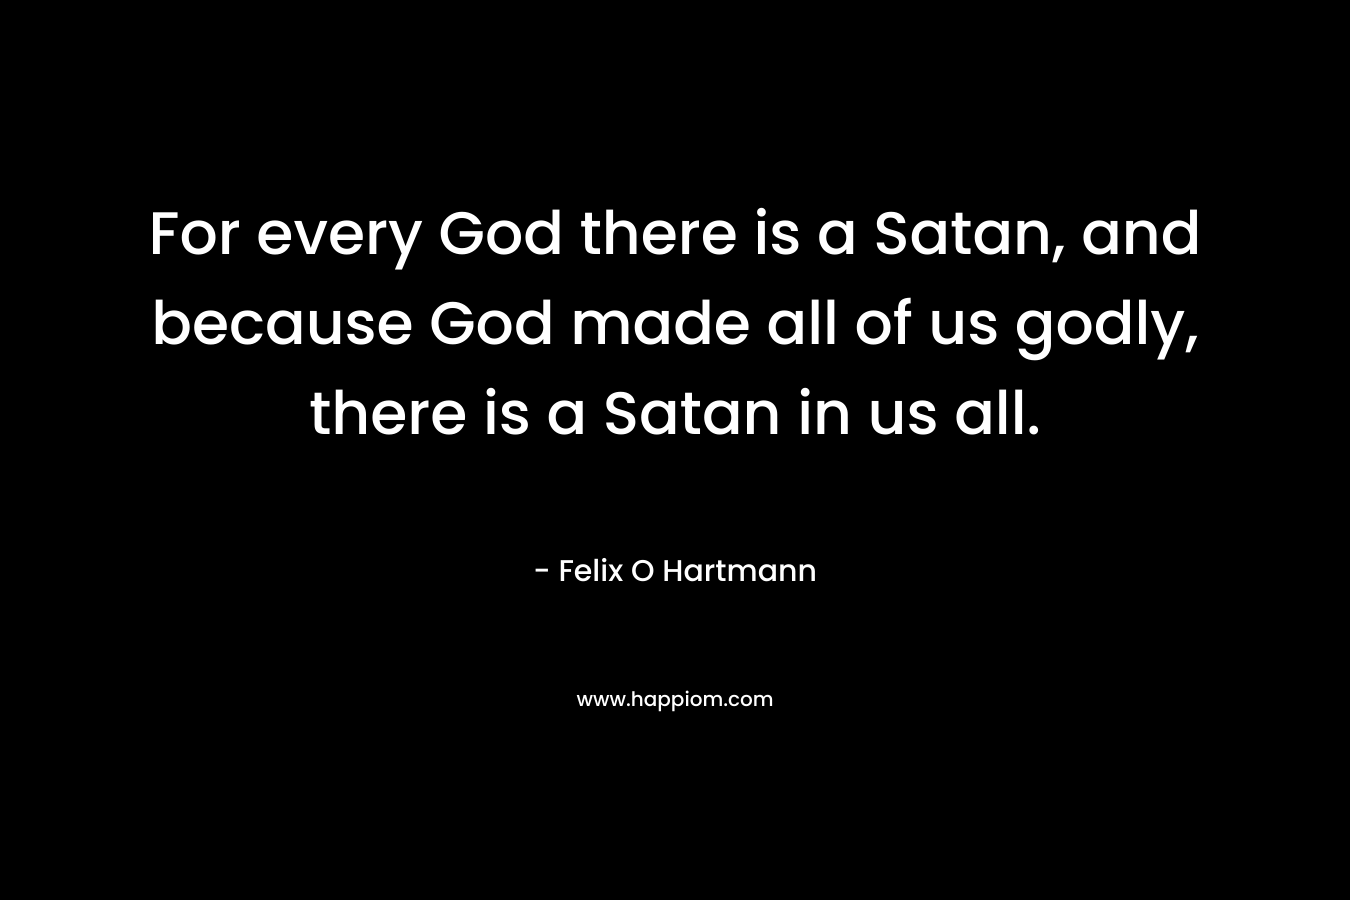 For every God there is a Satan, and because God made all of us godly, there is a Satan in us all. – Felix O Hartmann